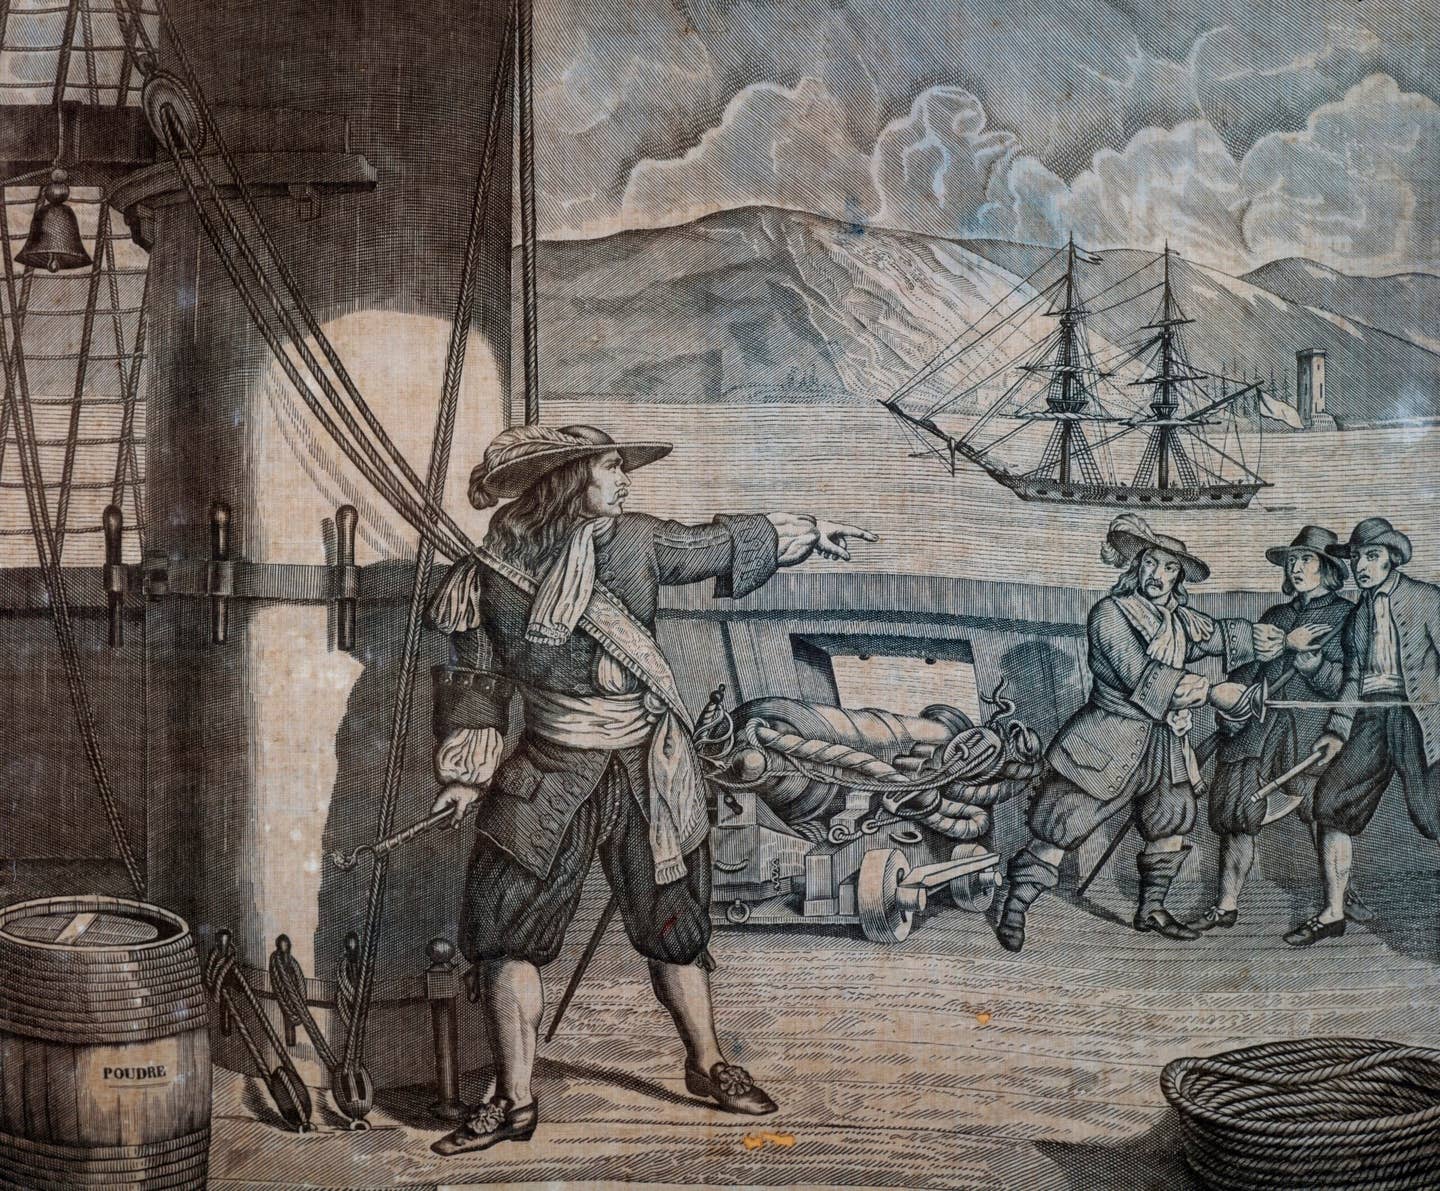 Powder kegs are prominent in this engraving of the French pirate captain Jean Bart (1650–1702), shown onboard a British ship. <em>Photo by DeAgostini/Getty Images</em>